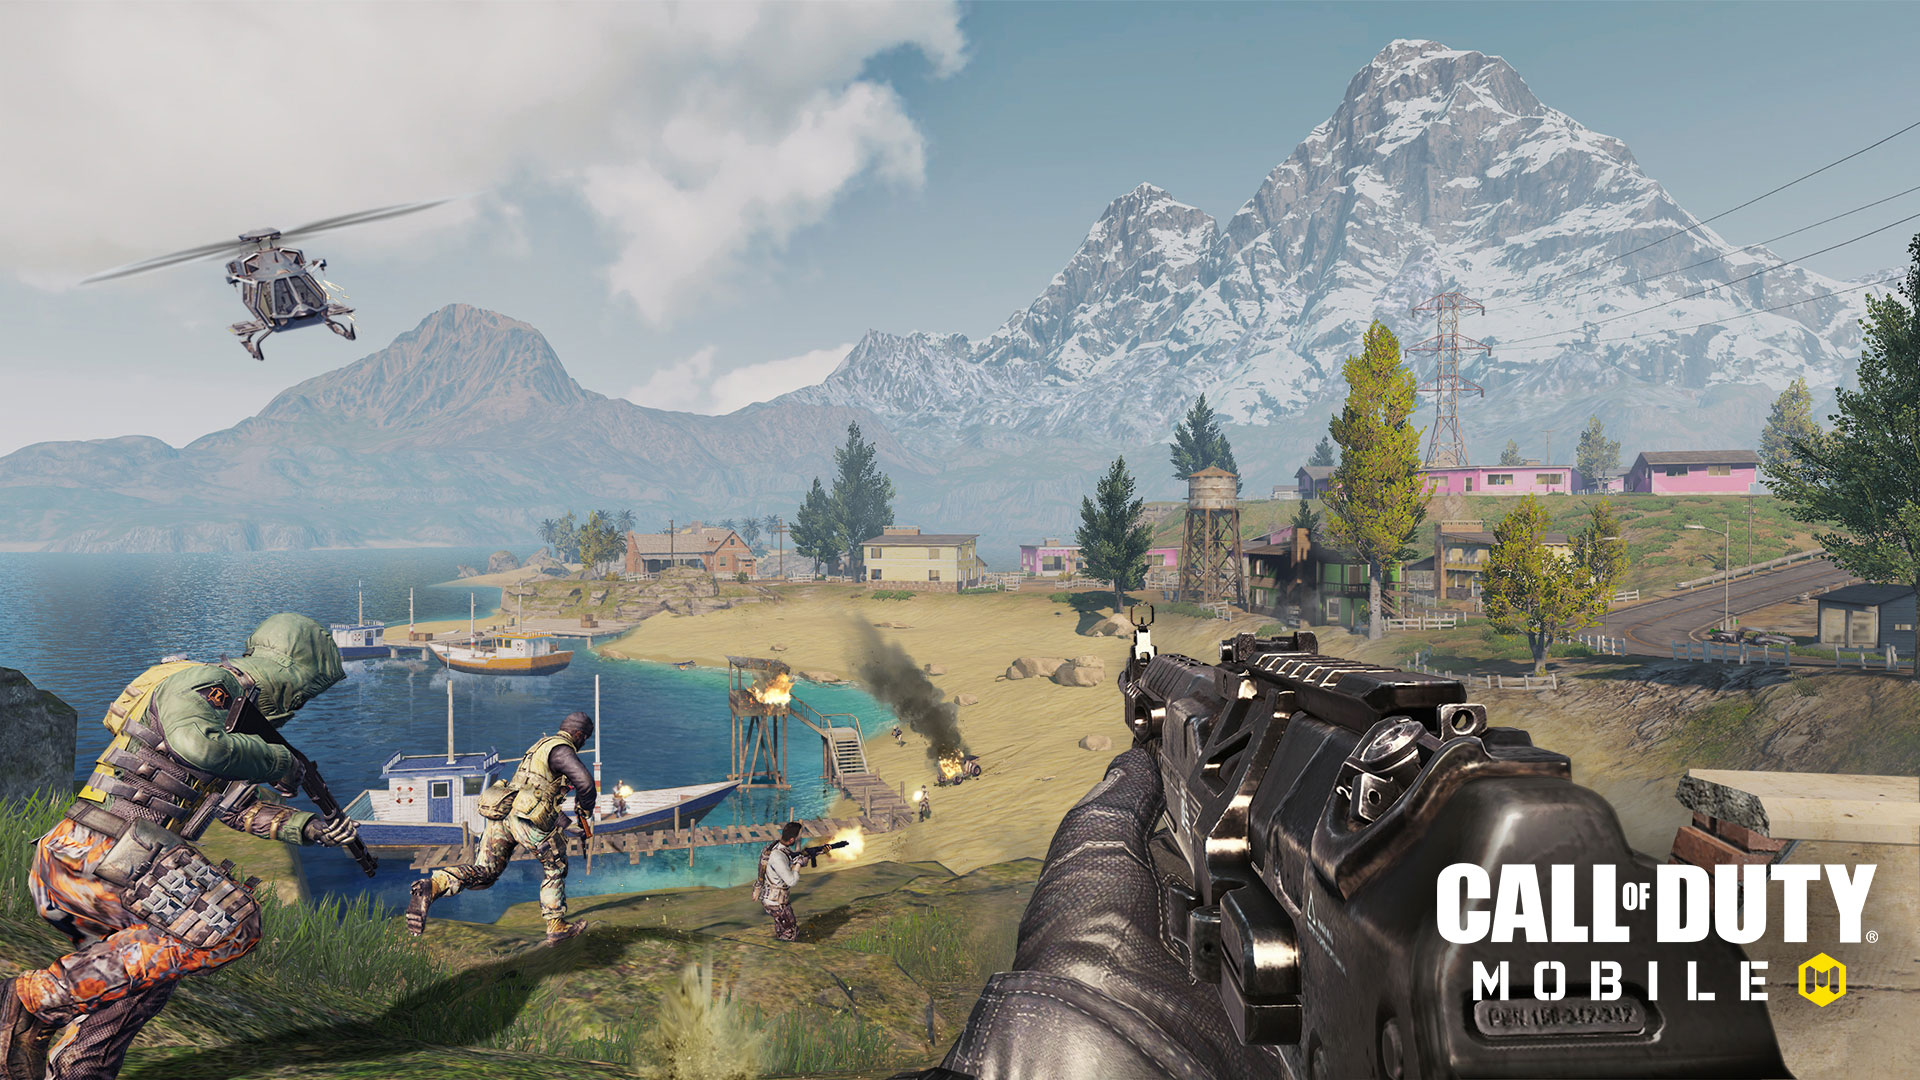 Details on progression and cosmetics in Call of Duty: Mobile ... - 